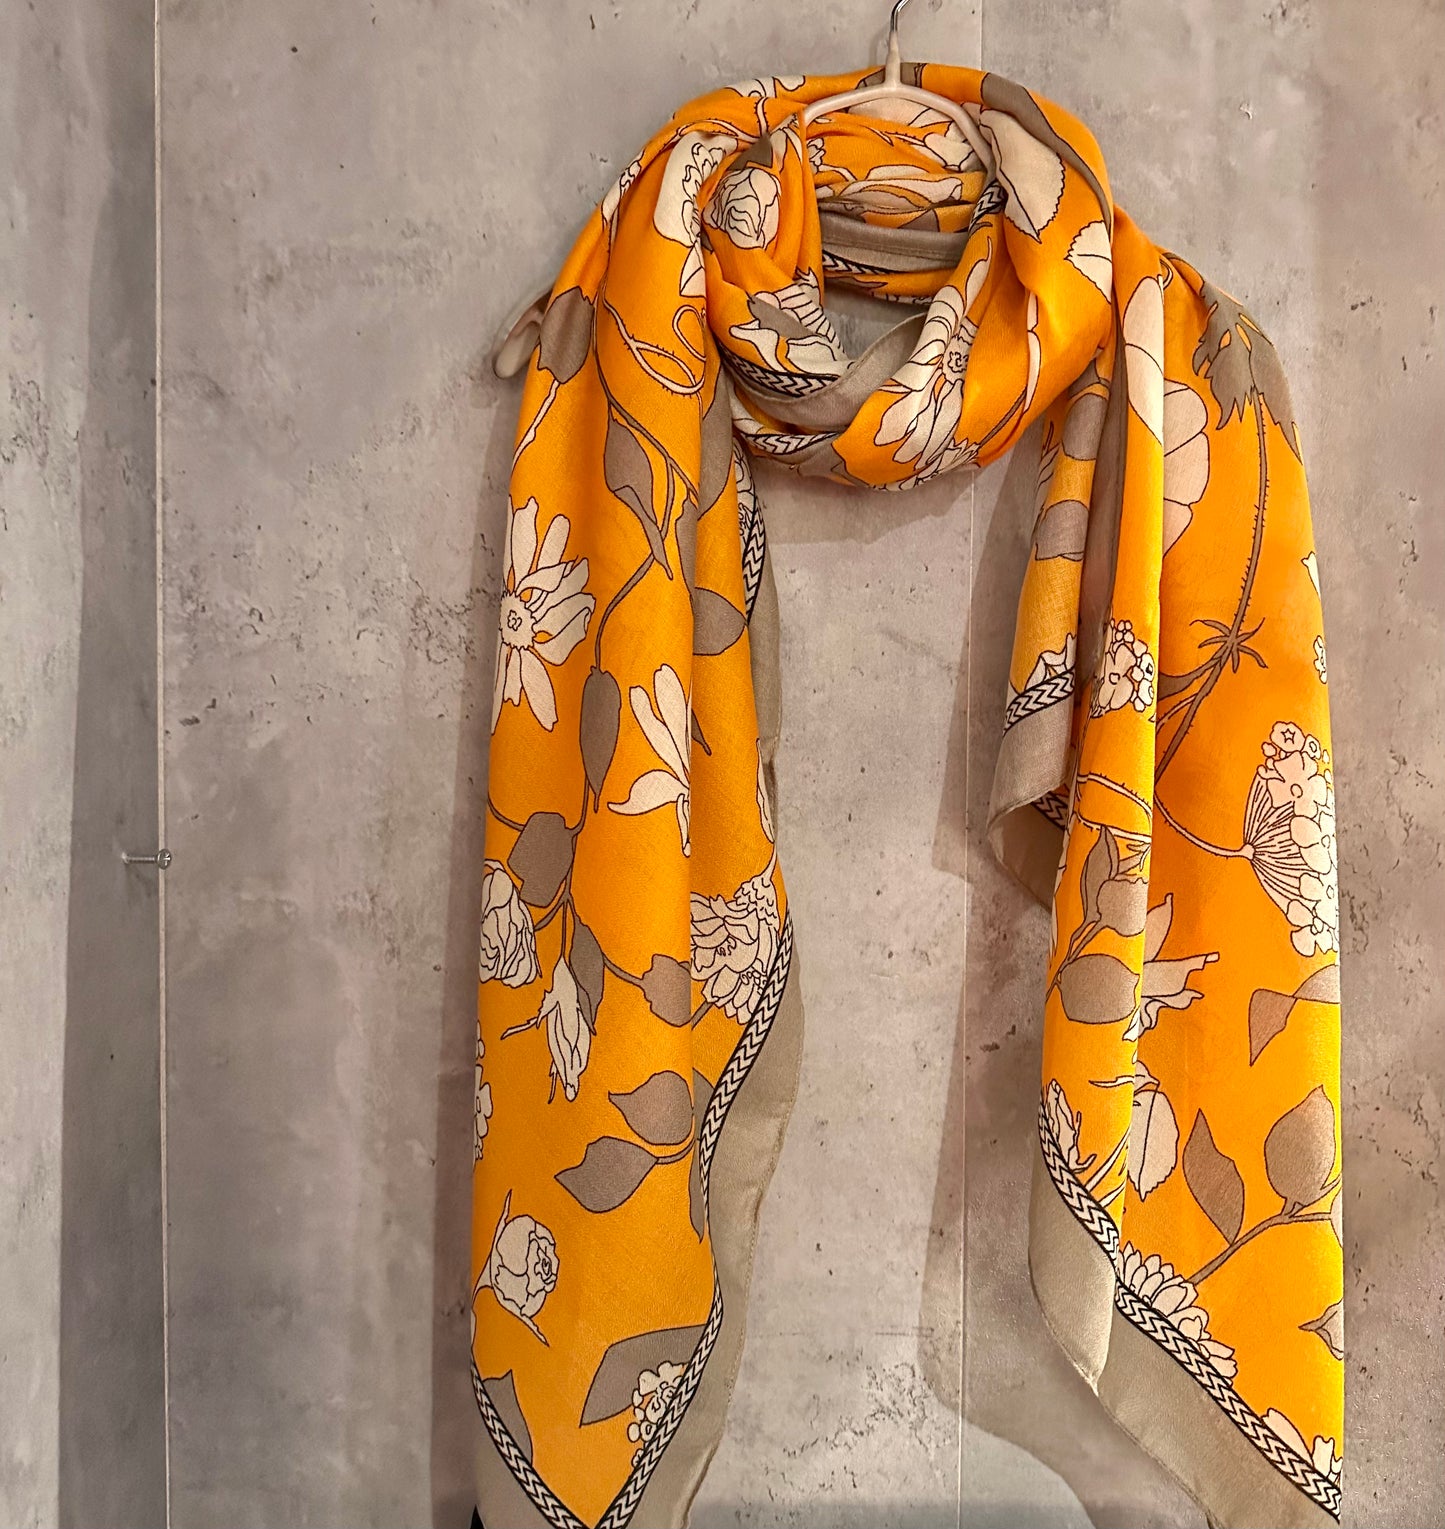 Sketched Flowers Orange Cotton Scarf/Summer Autumn Scarf/Scarf Women/Gifts For Mom/Gifts For Her Birthday Christmas/UK Seller